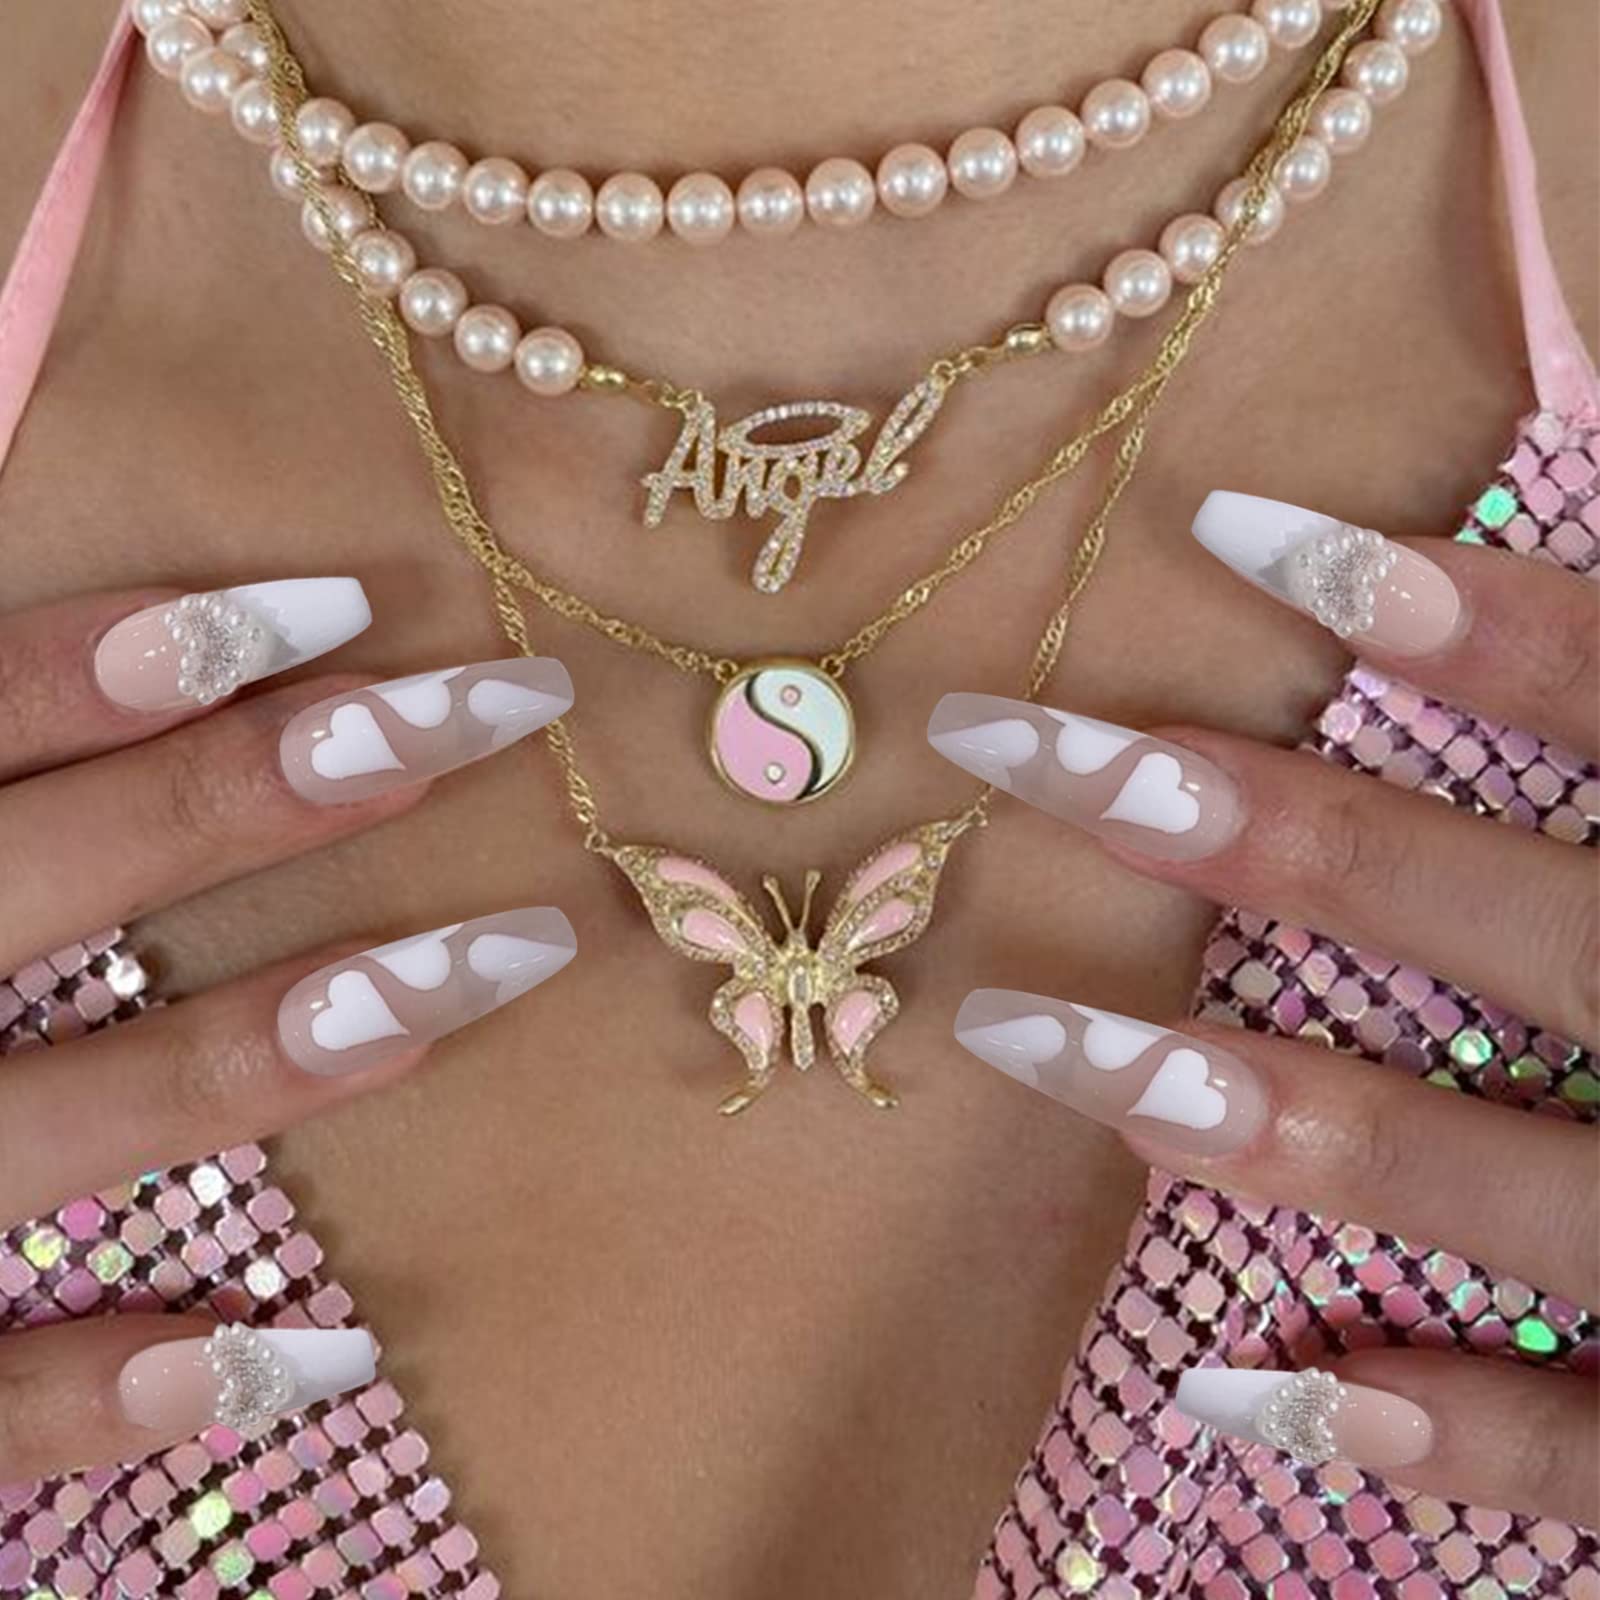 QINGGE Pink French Tip Press on Nails Long Coffin Fake Nails with White Pearl Heart Bow Silver Glitter Design Elegant Stick on Nails Glue on Nails Glossy Acrylic Nails False Nails